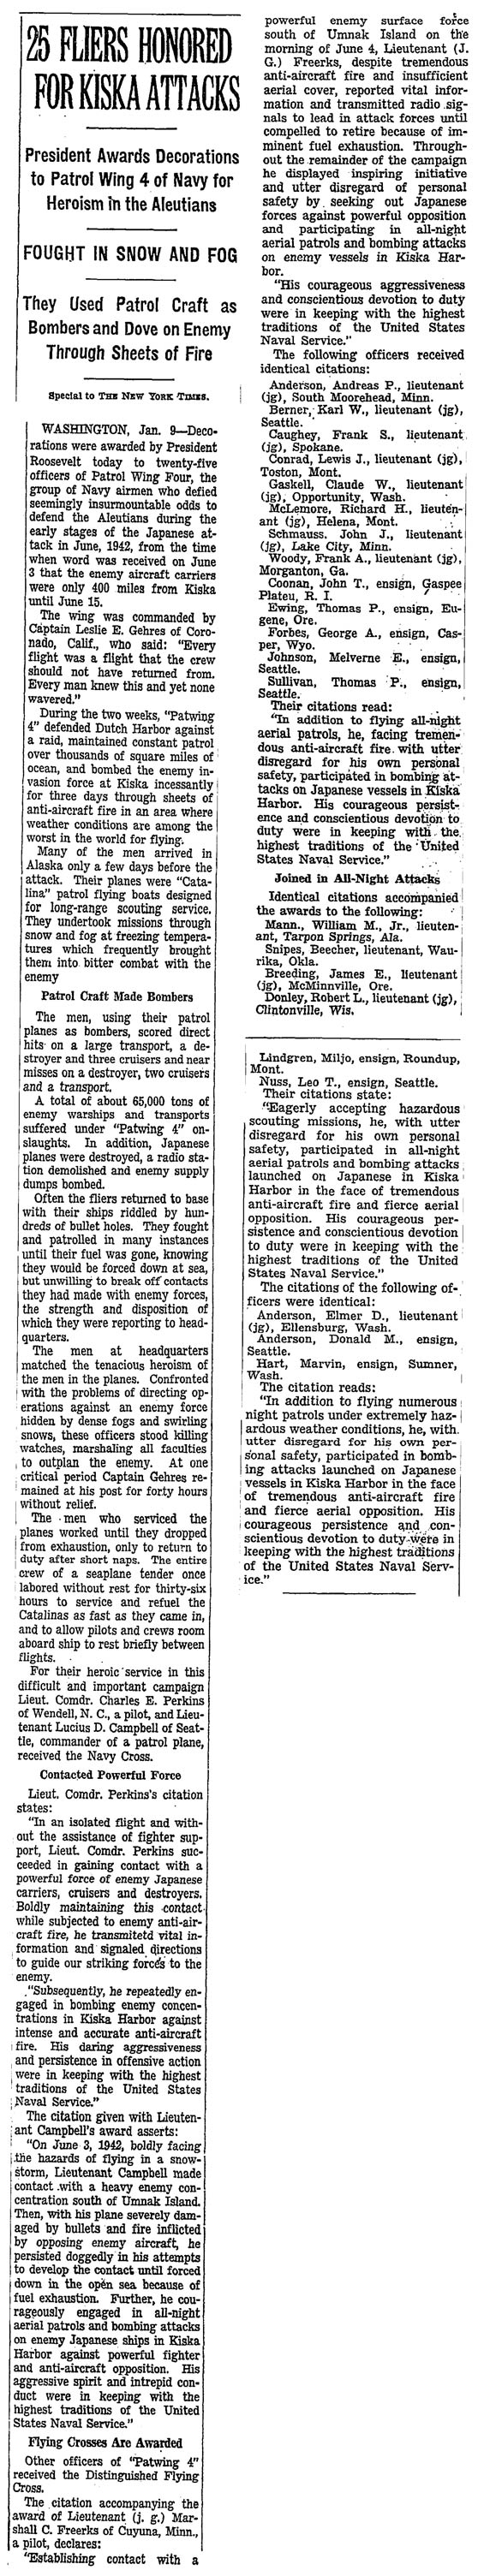 Gehres in Alaska, The New York Times, January 10, 1943 (Source: NYT)